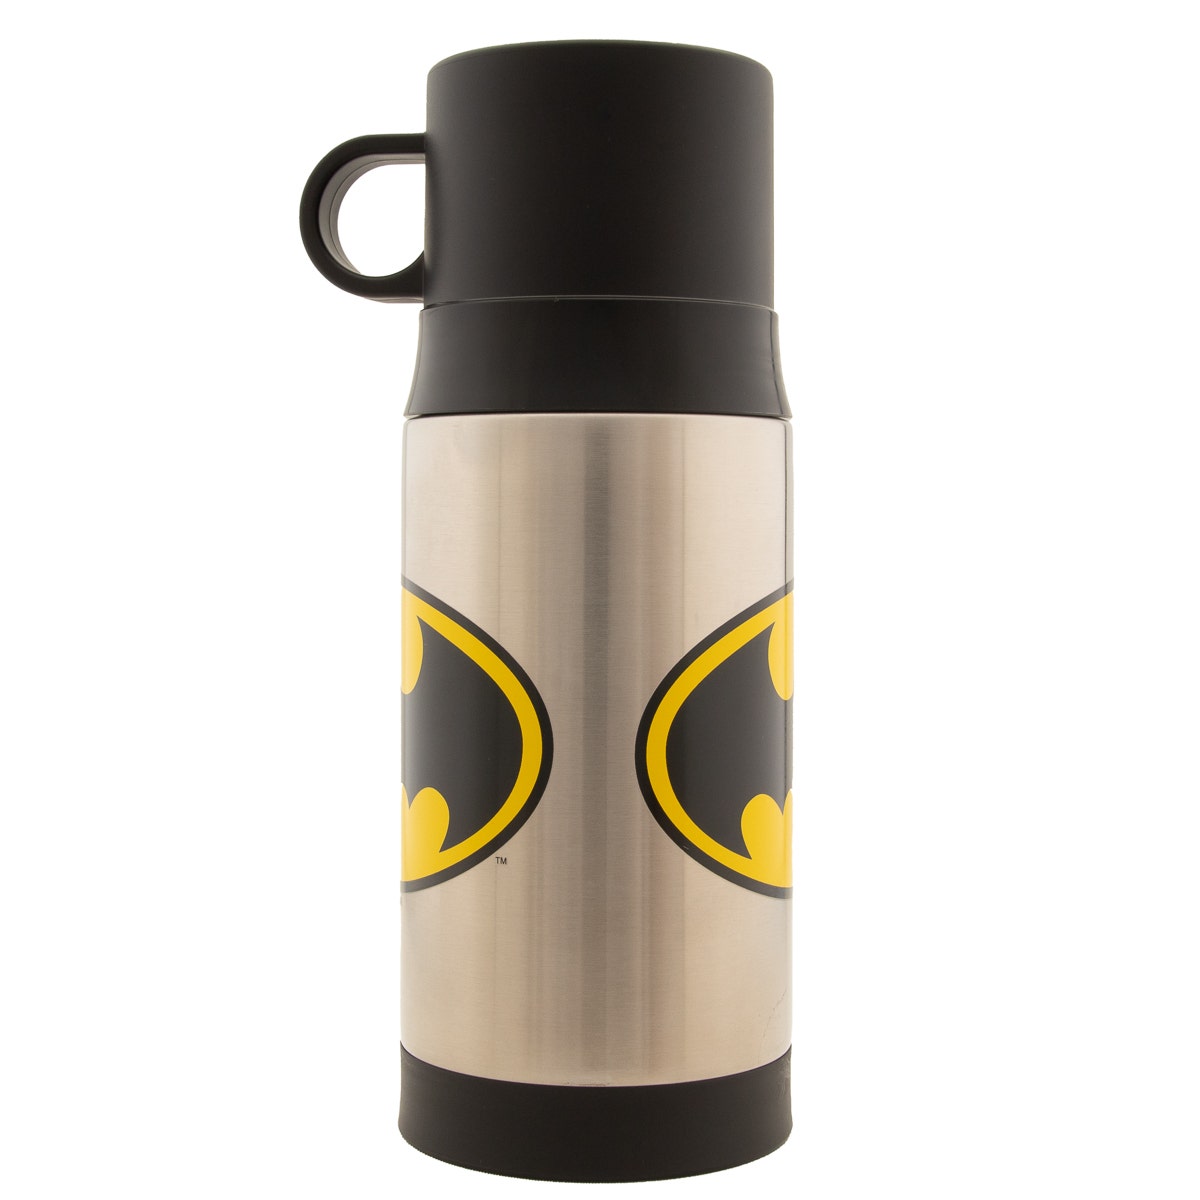 Thermos Funtainer 12oz Insulated Drink Bottle - Keeps Hot Or Cool